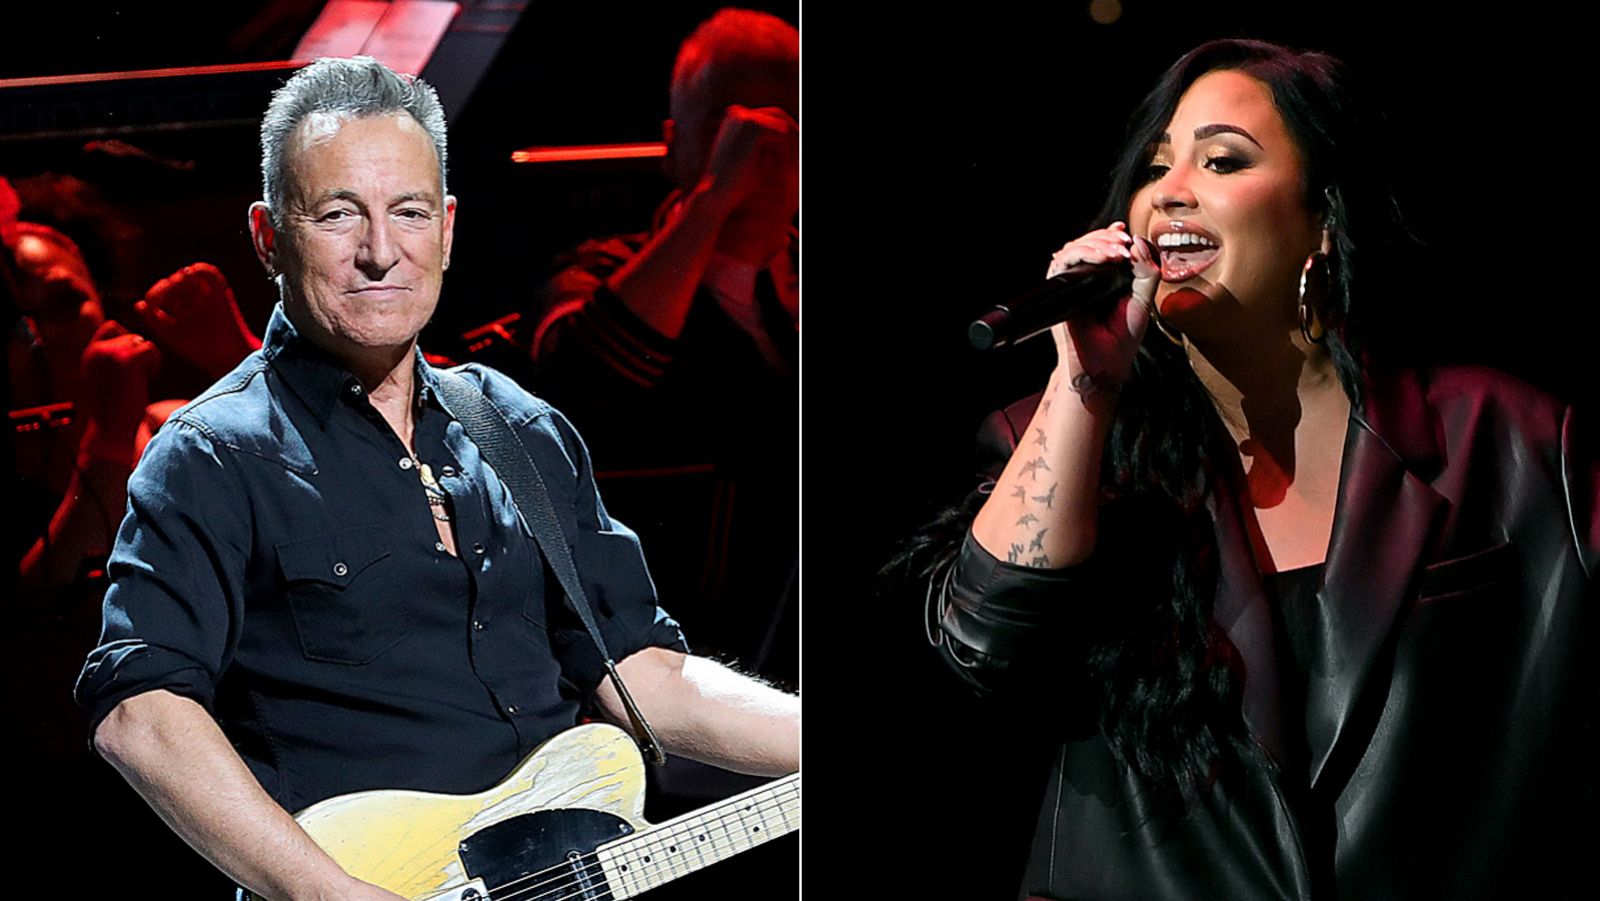 PHOTO: Bruce Springsteen performs onstage Dec. 9, 2019 in New York City. | Demi Lovato performs onstage on Feb. 1, 2020 in Miami, Florida.